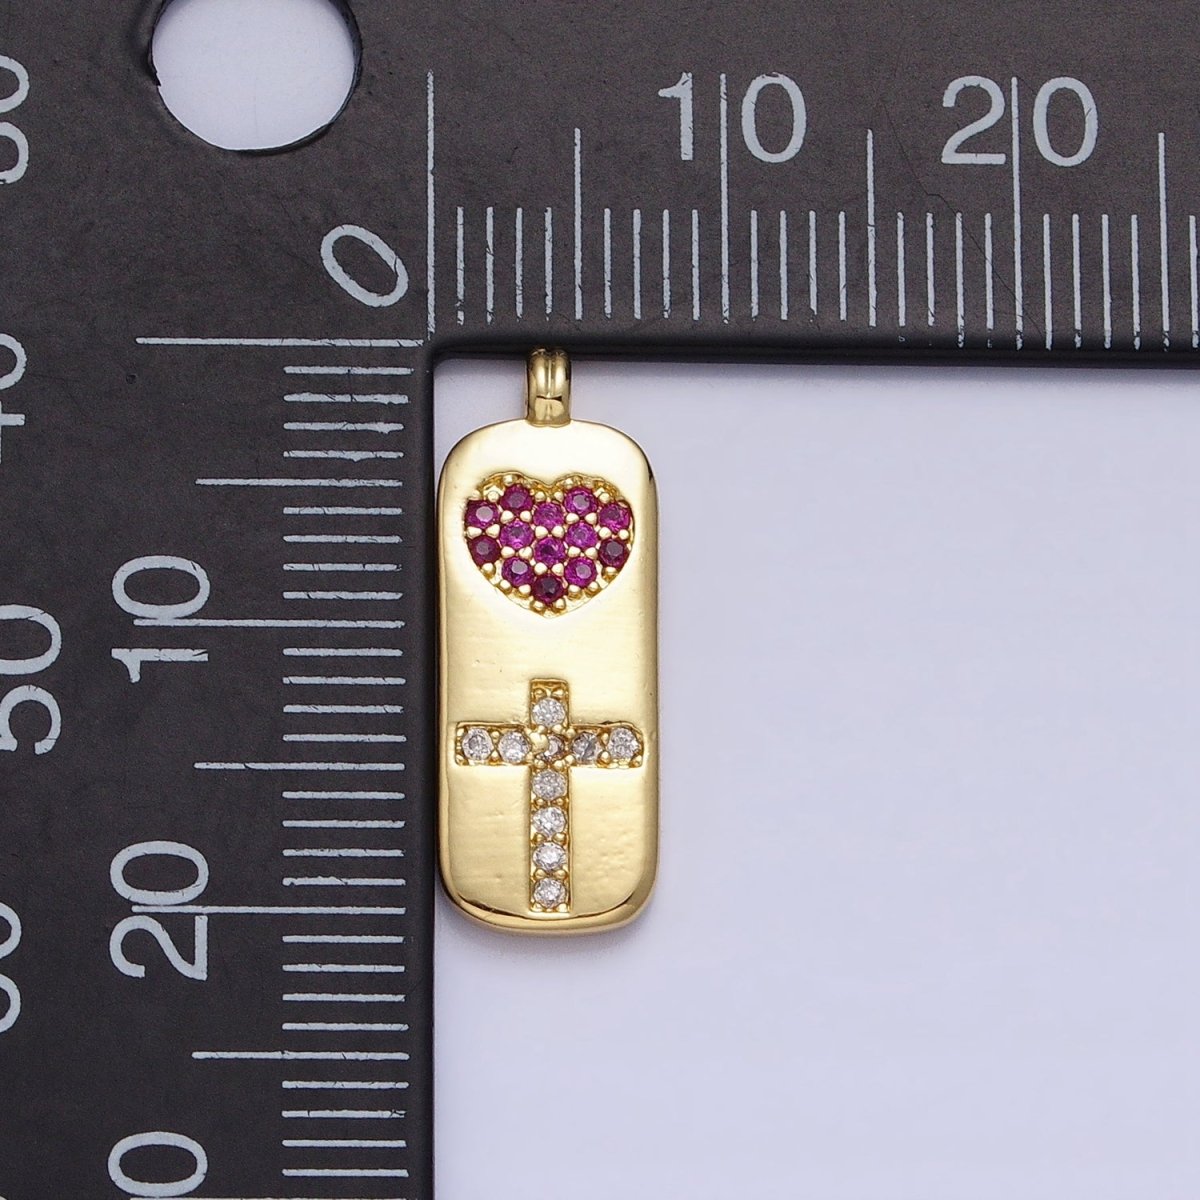 Fuchsia Heart with Clear Cz Cross in gold Tag charm for Dangle Religious Jewelry Supply AA237 - DLUXCA